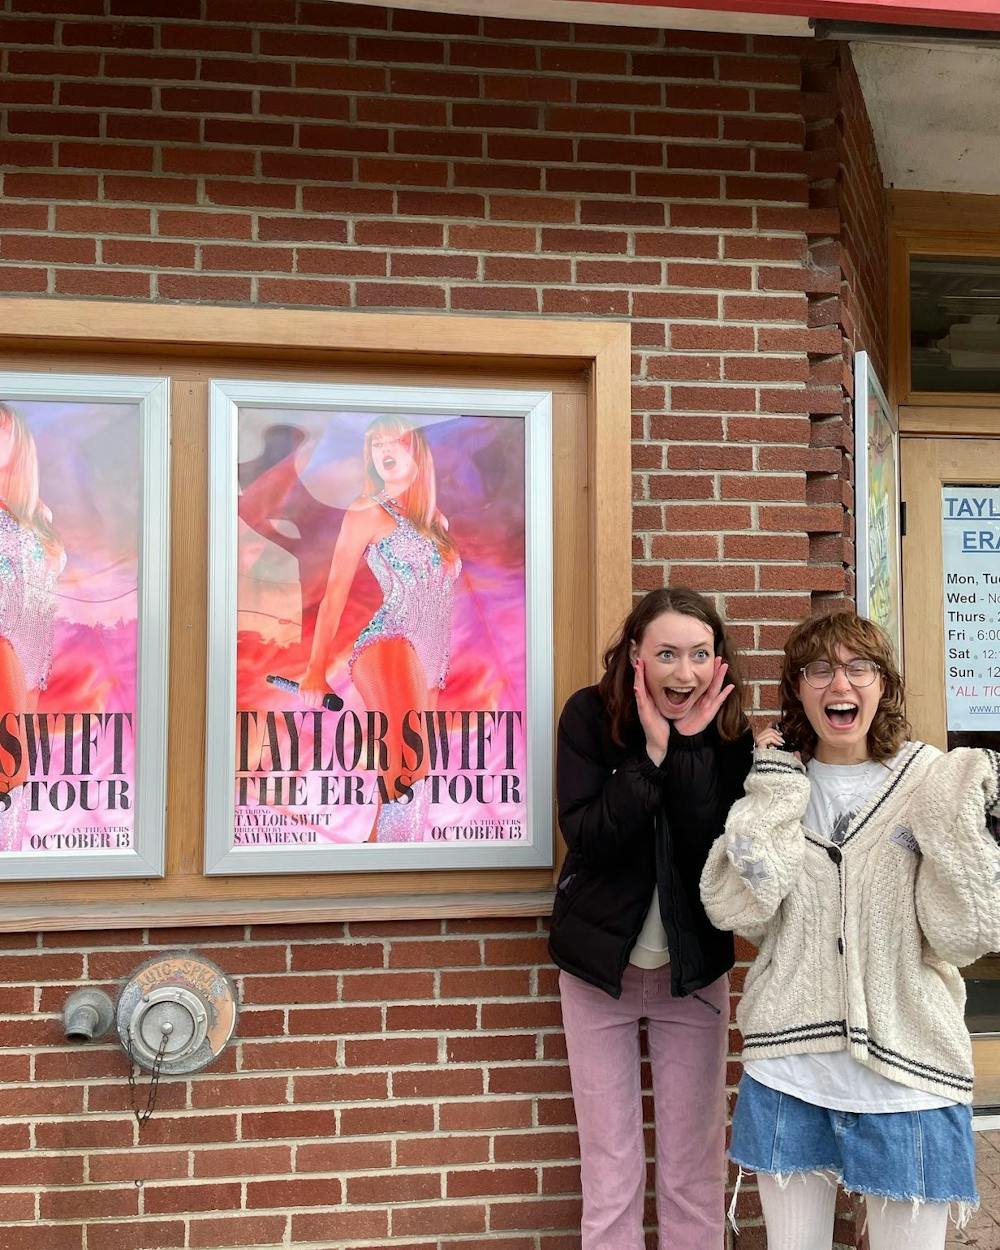 Acadia Klepeis '24 and Kristen Morgenstern '24 attend the premiere of "Taylor Swift: The Eras Tour" at the Middlebury Marquis.